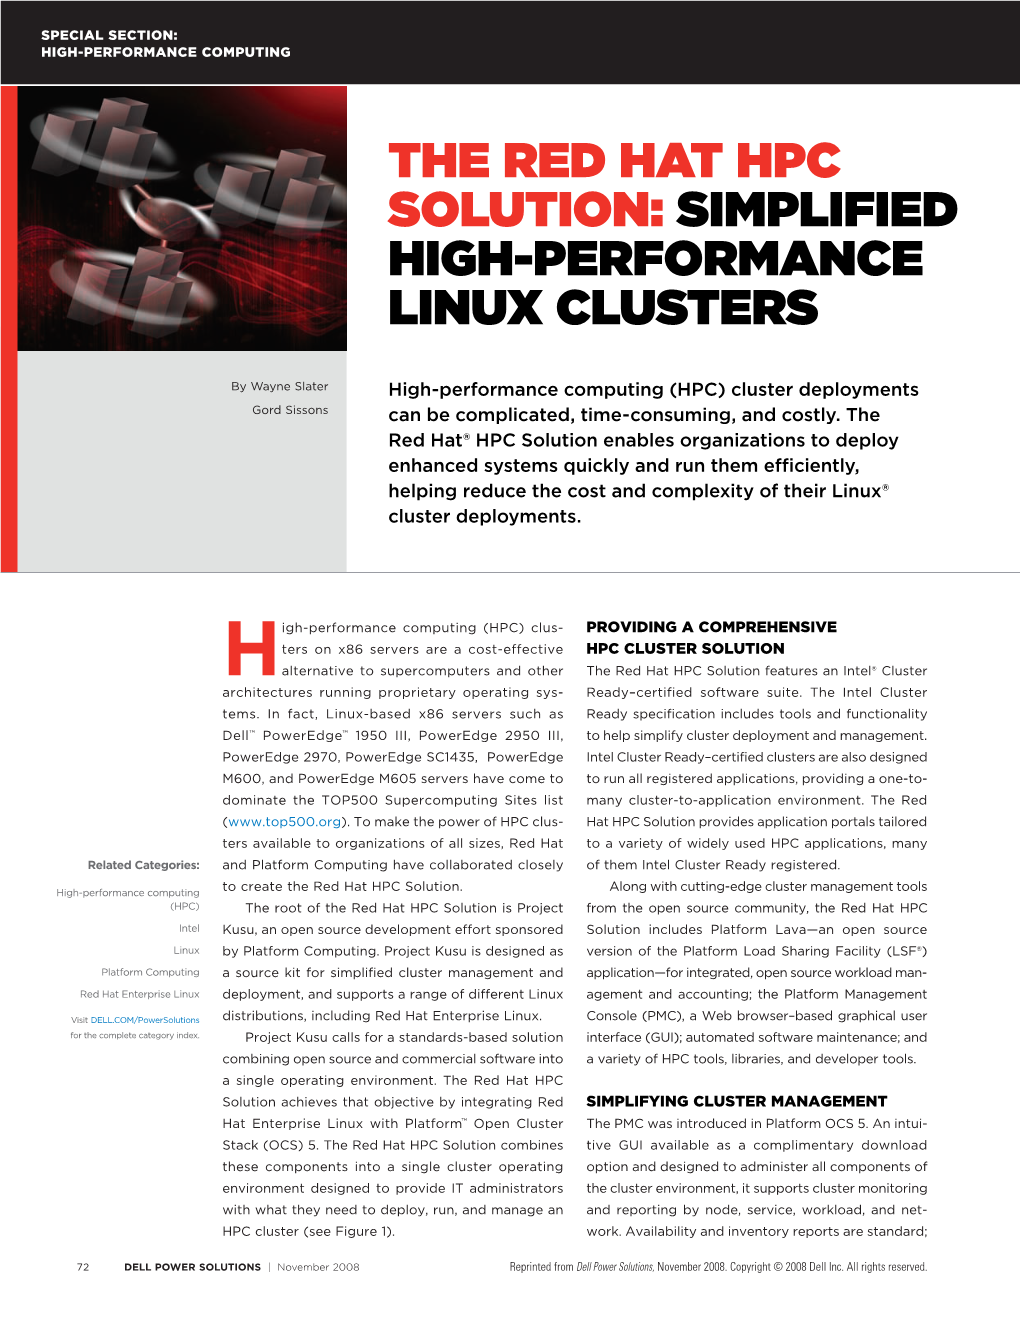 The Red Hat HPC Solution: Simplified High-Performance Linux Clusters